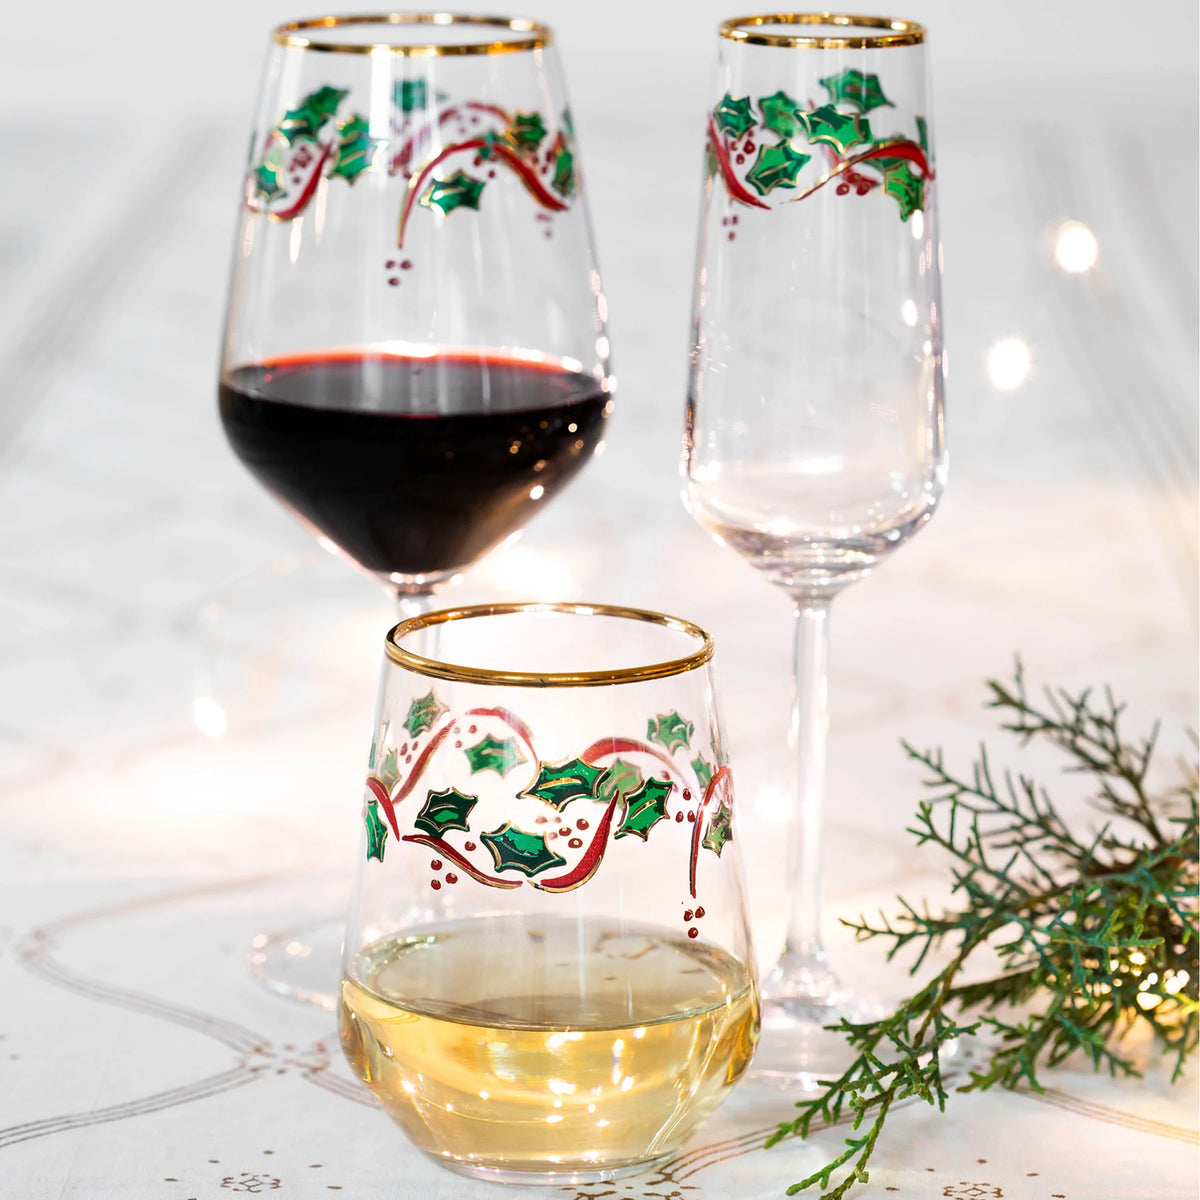 https://www.marketoceandrive.shop/wp-content/uploads/1691/01/purchase-the-latest-s-4-holly-wine-glass-vietri-vietri-models-at-great-prices_1.webp